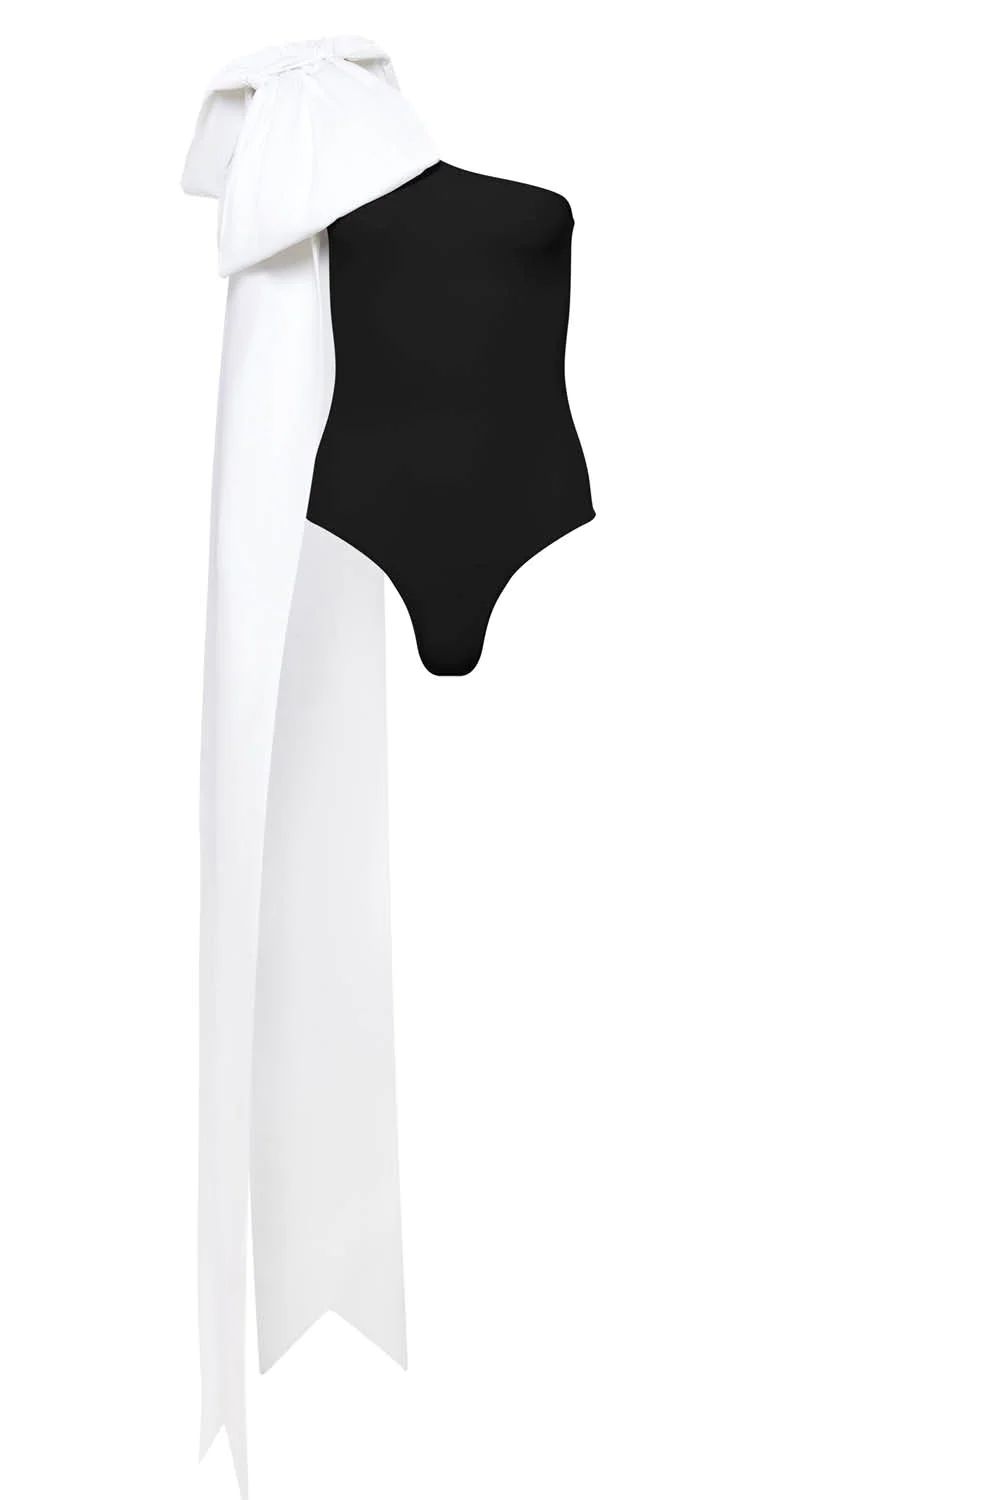 Milly Swimsuit in Black with White Bow | MAISON-DE-MODE.COM